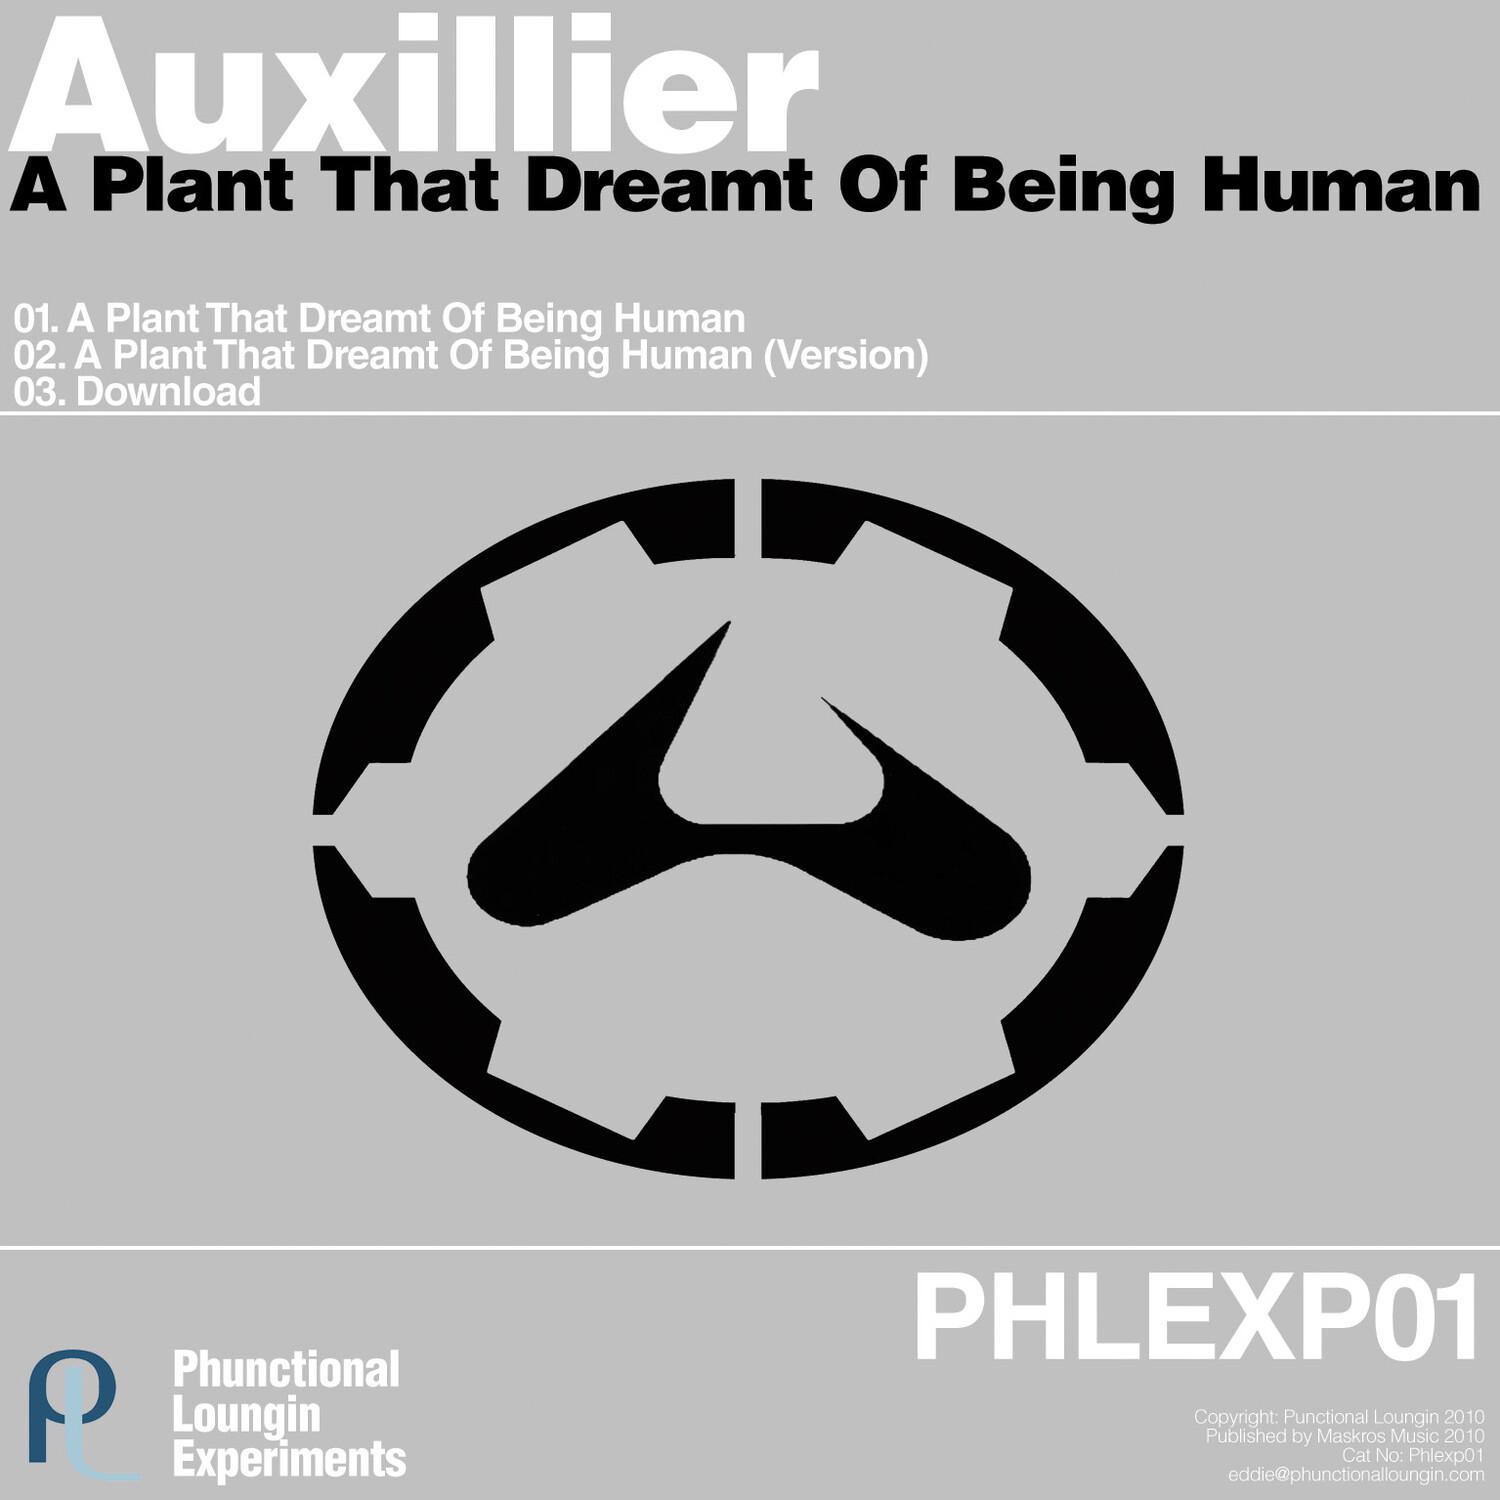 A Plant That Dreamt Of Being Human